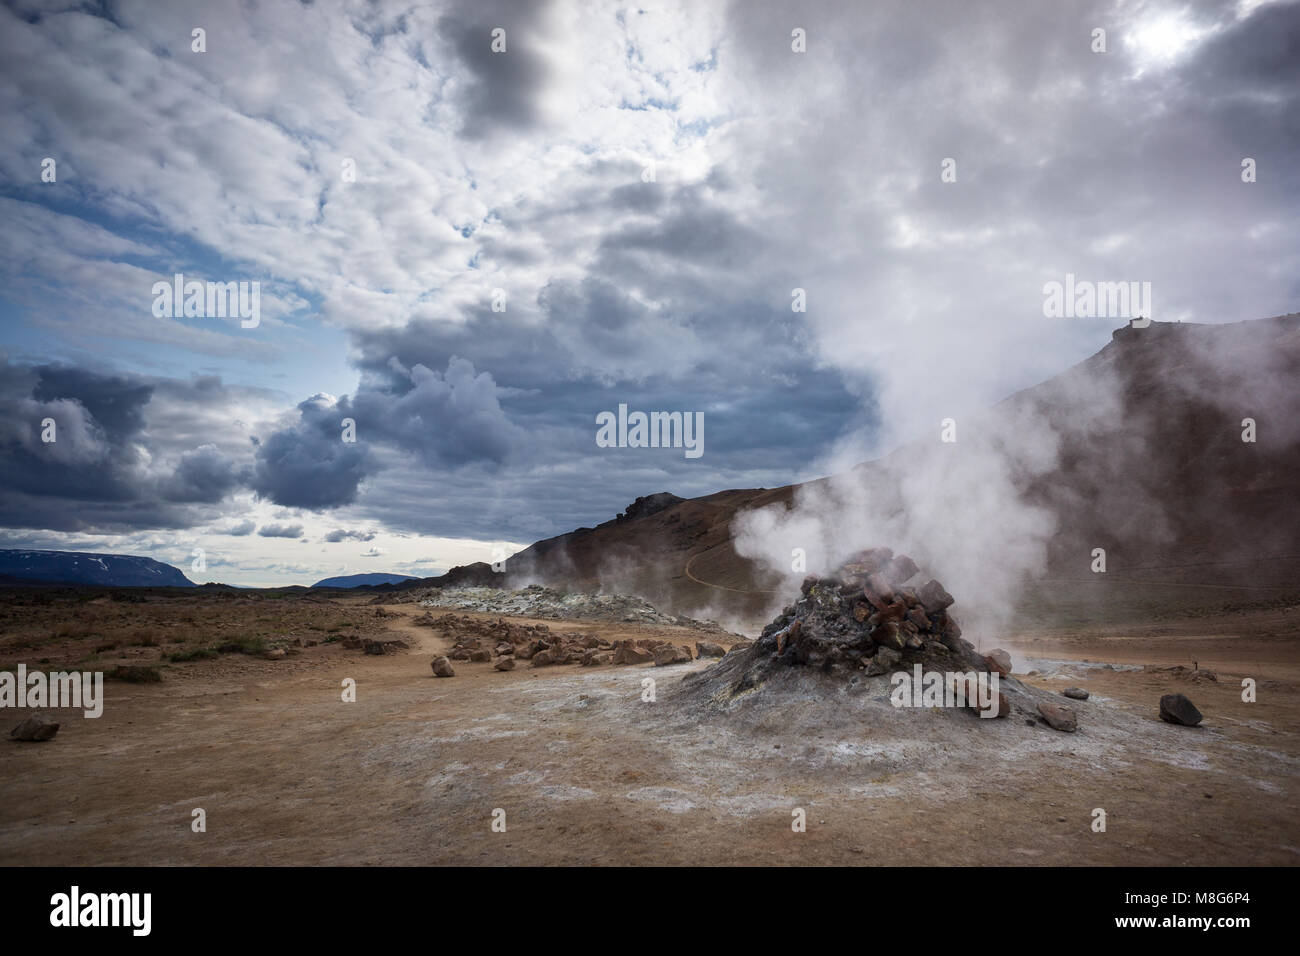 Hissing chimney in large geothermal field of Hverir during a cloudy day in Iceland Stock Photo